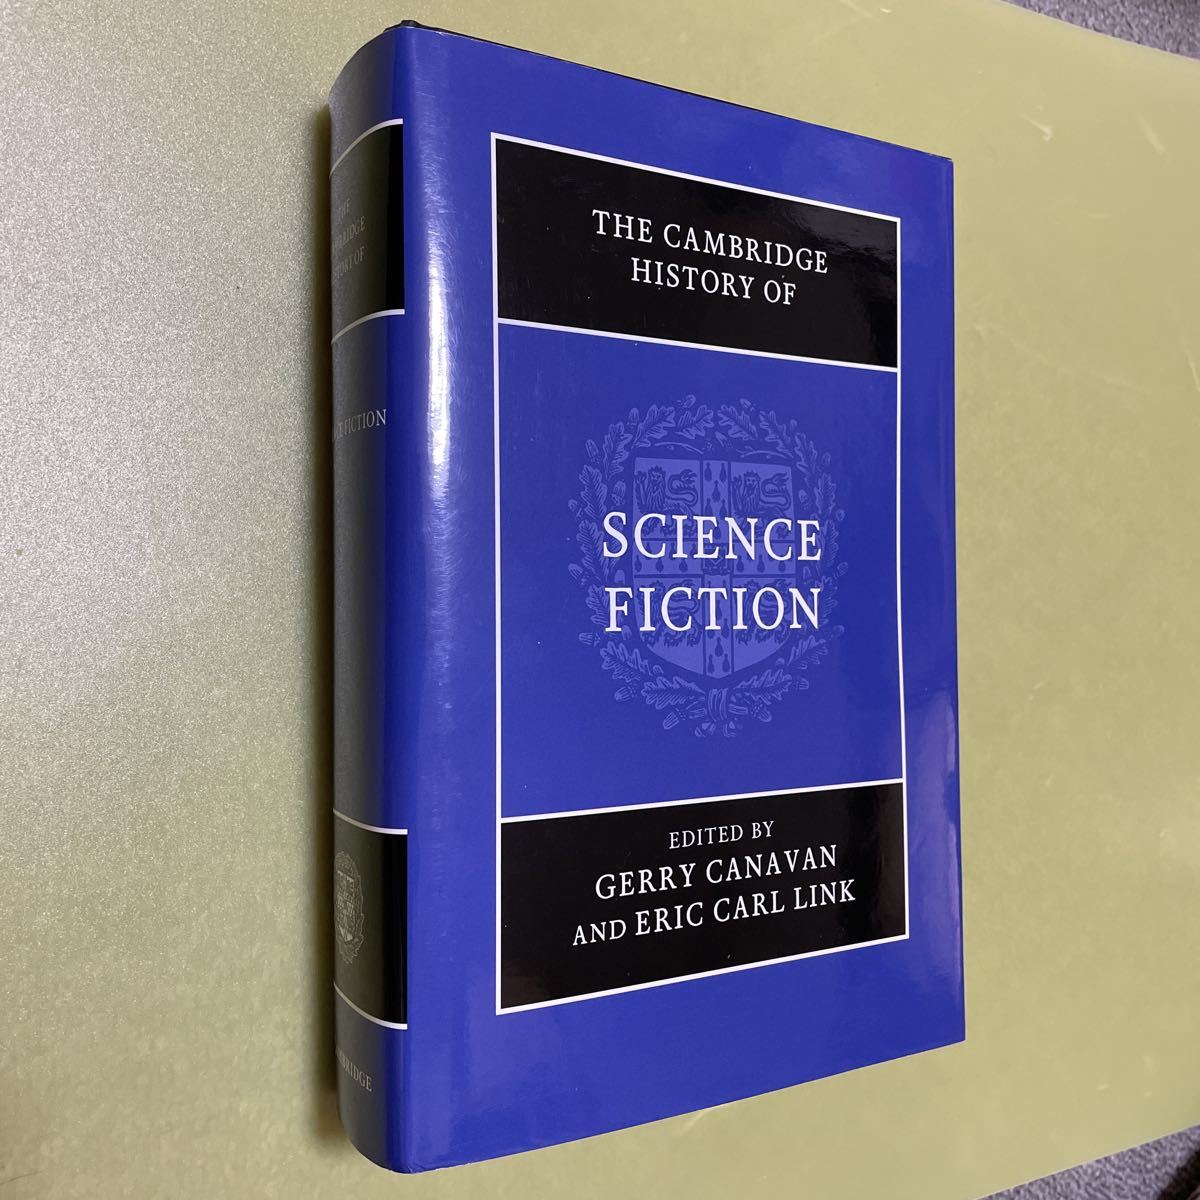 ◎SF英語本　The Cambridge History of Science Fiction